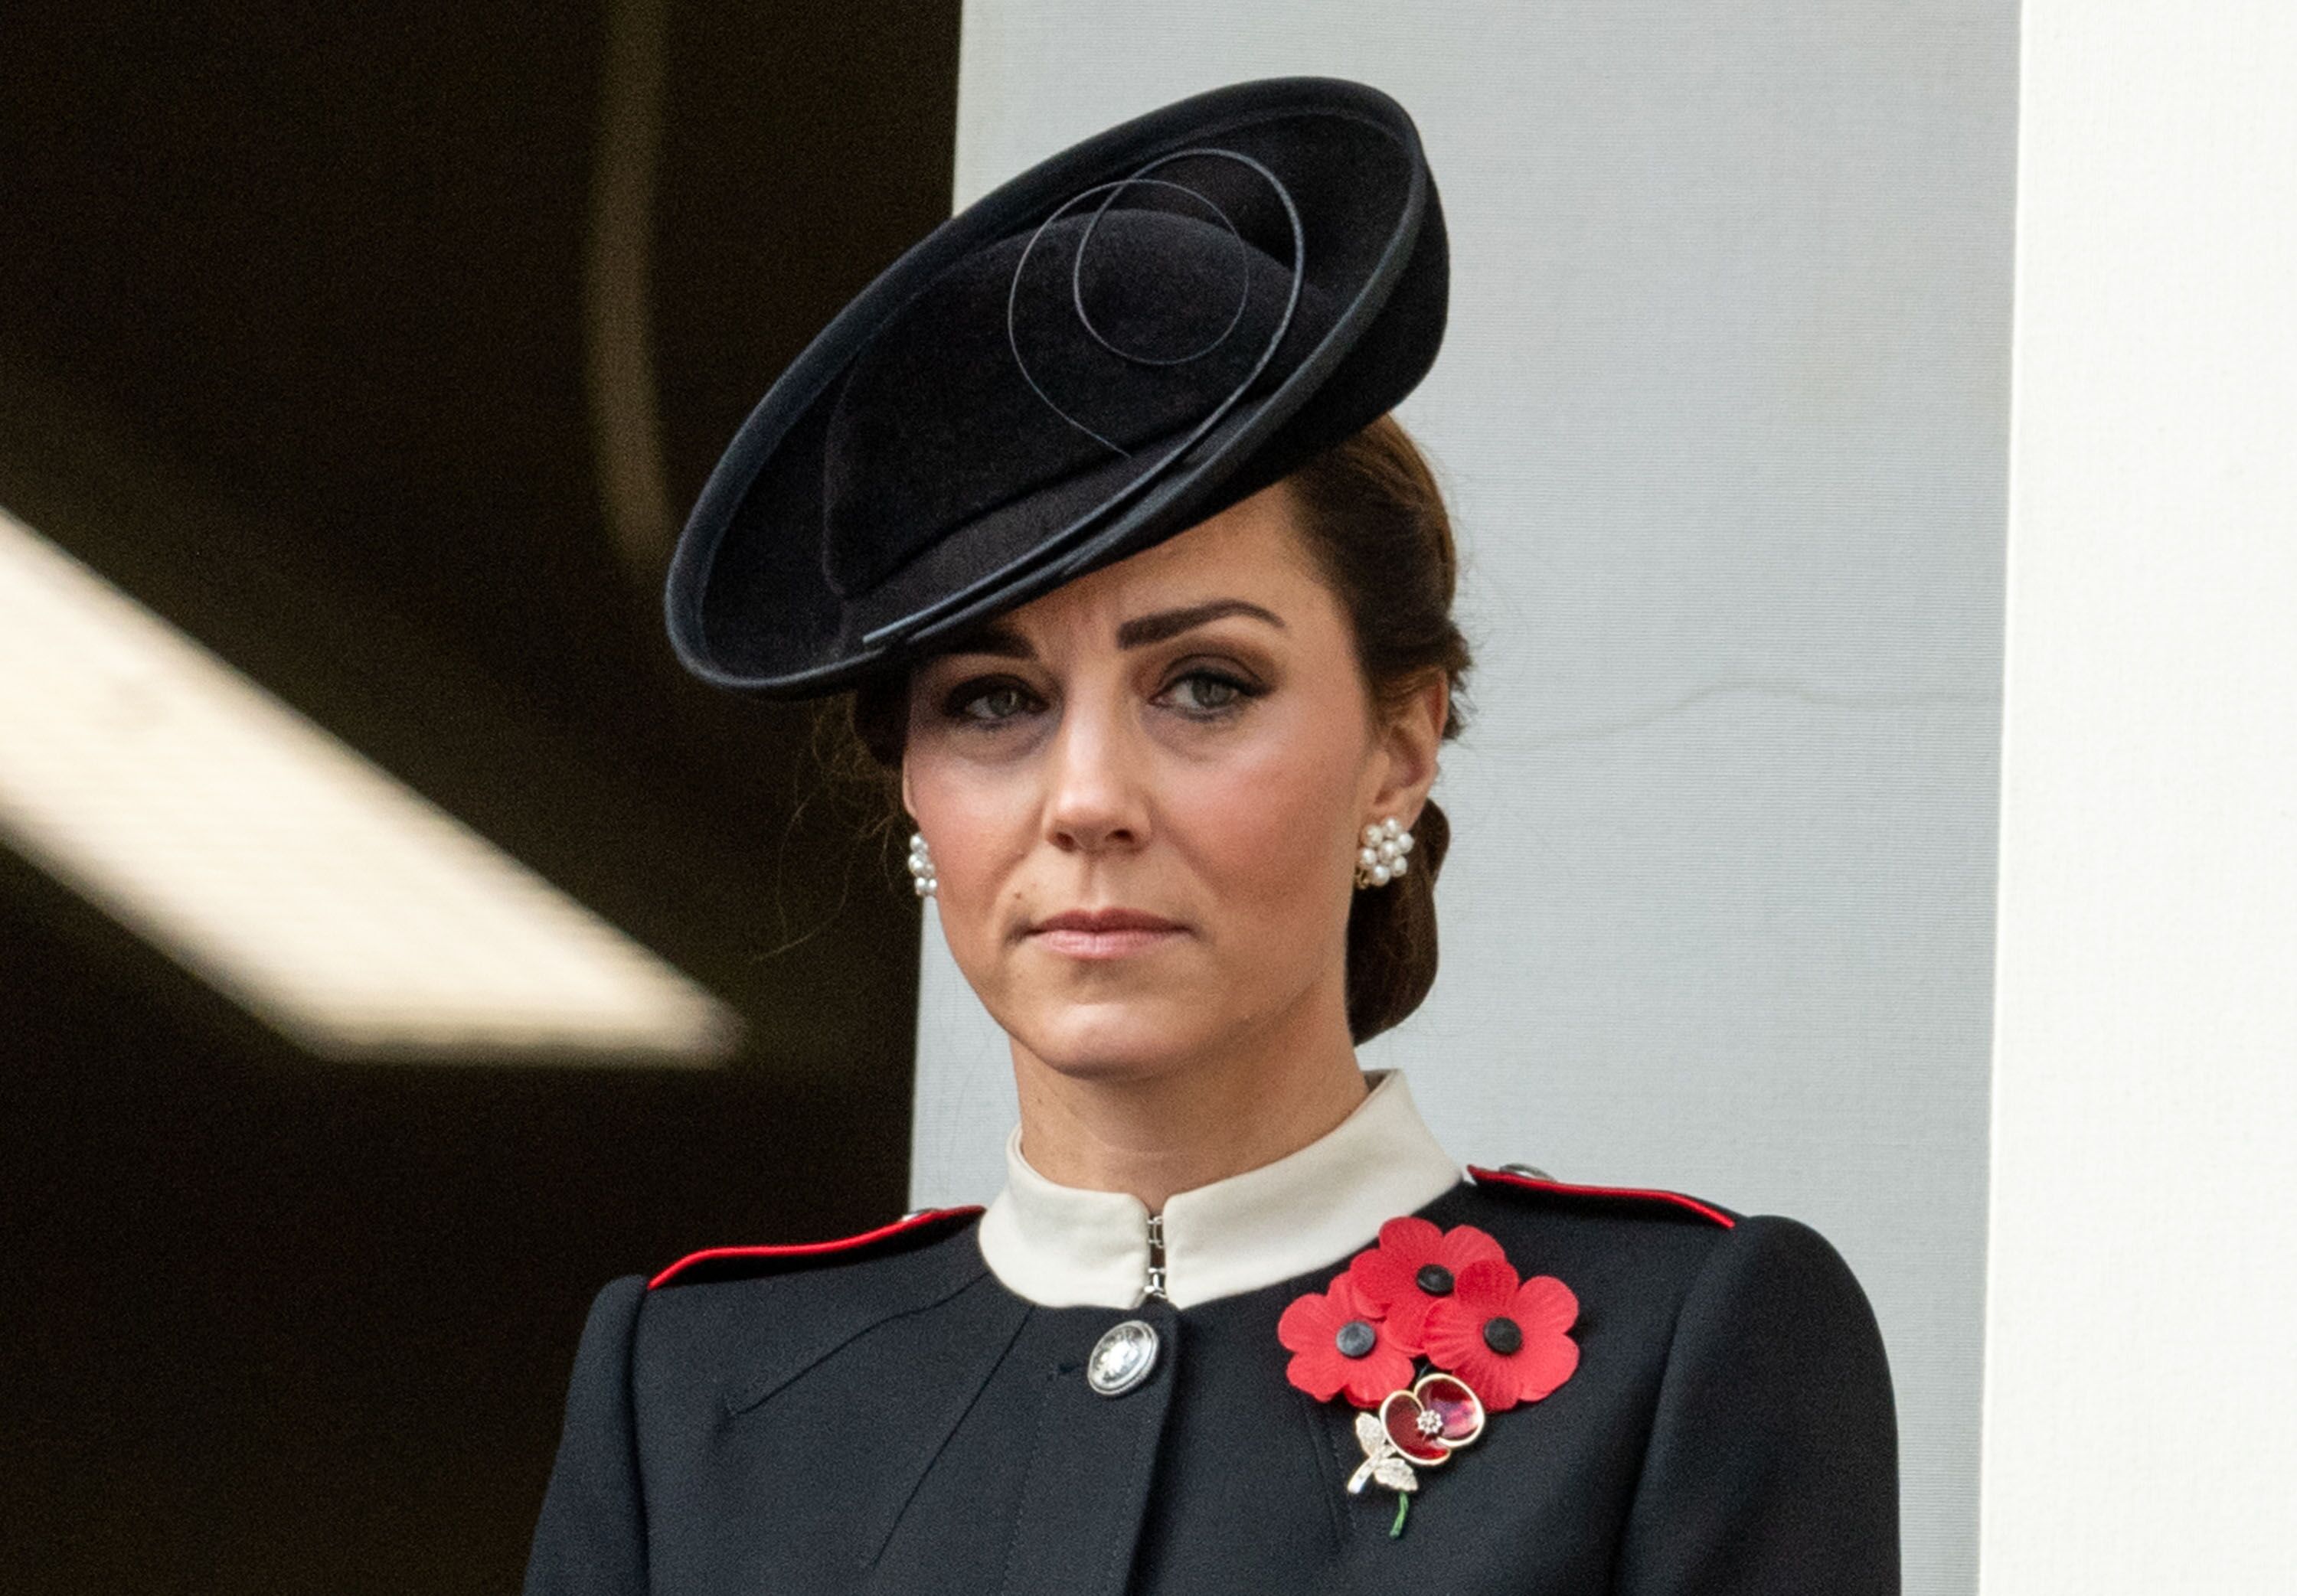 Kate Middleton during the annual Remembrance Sunday memorial at the Cenotaph on November 11, 2018 in London, England. | Source: Getty Images